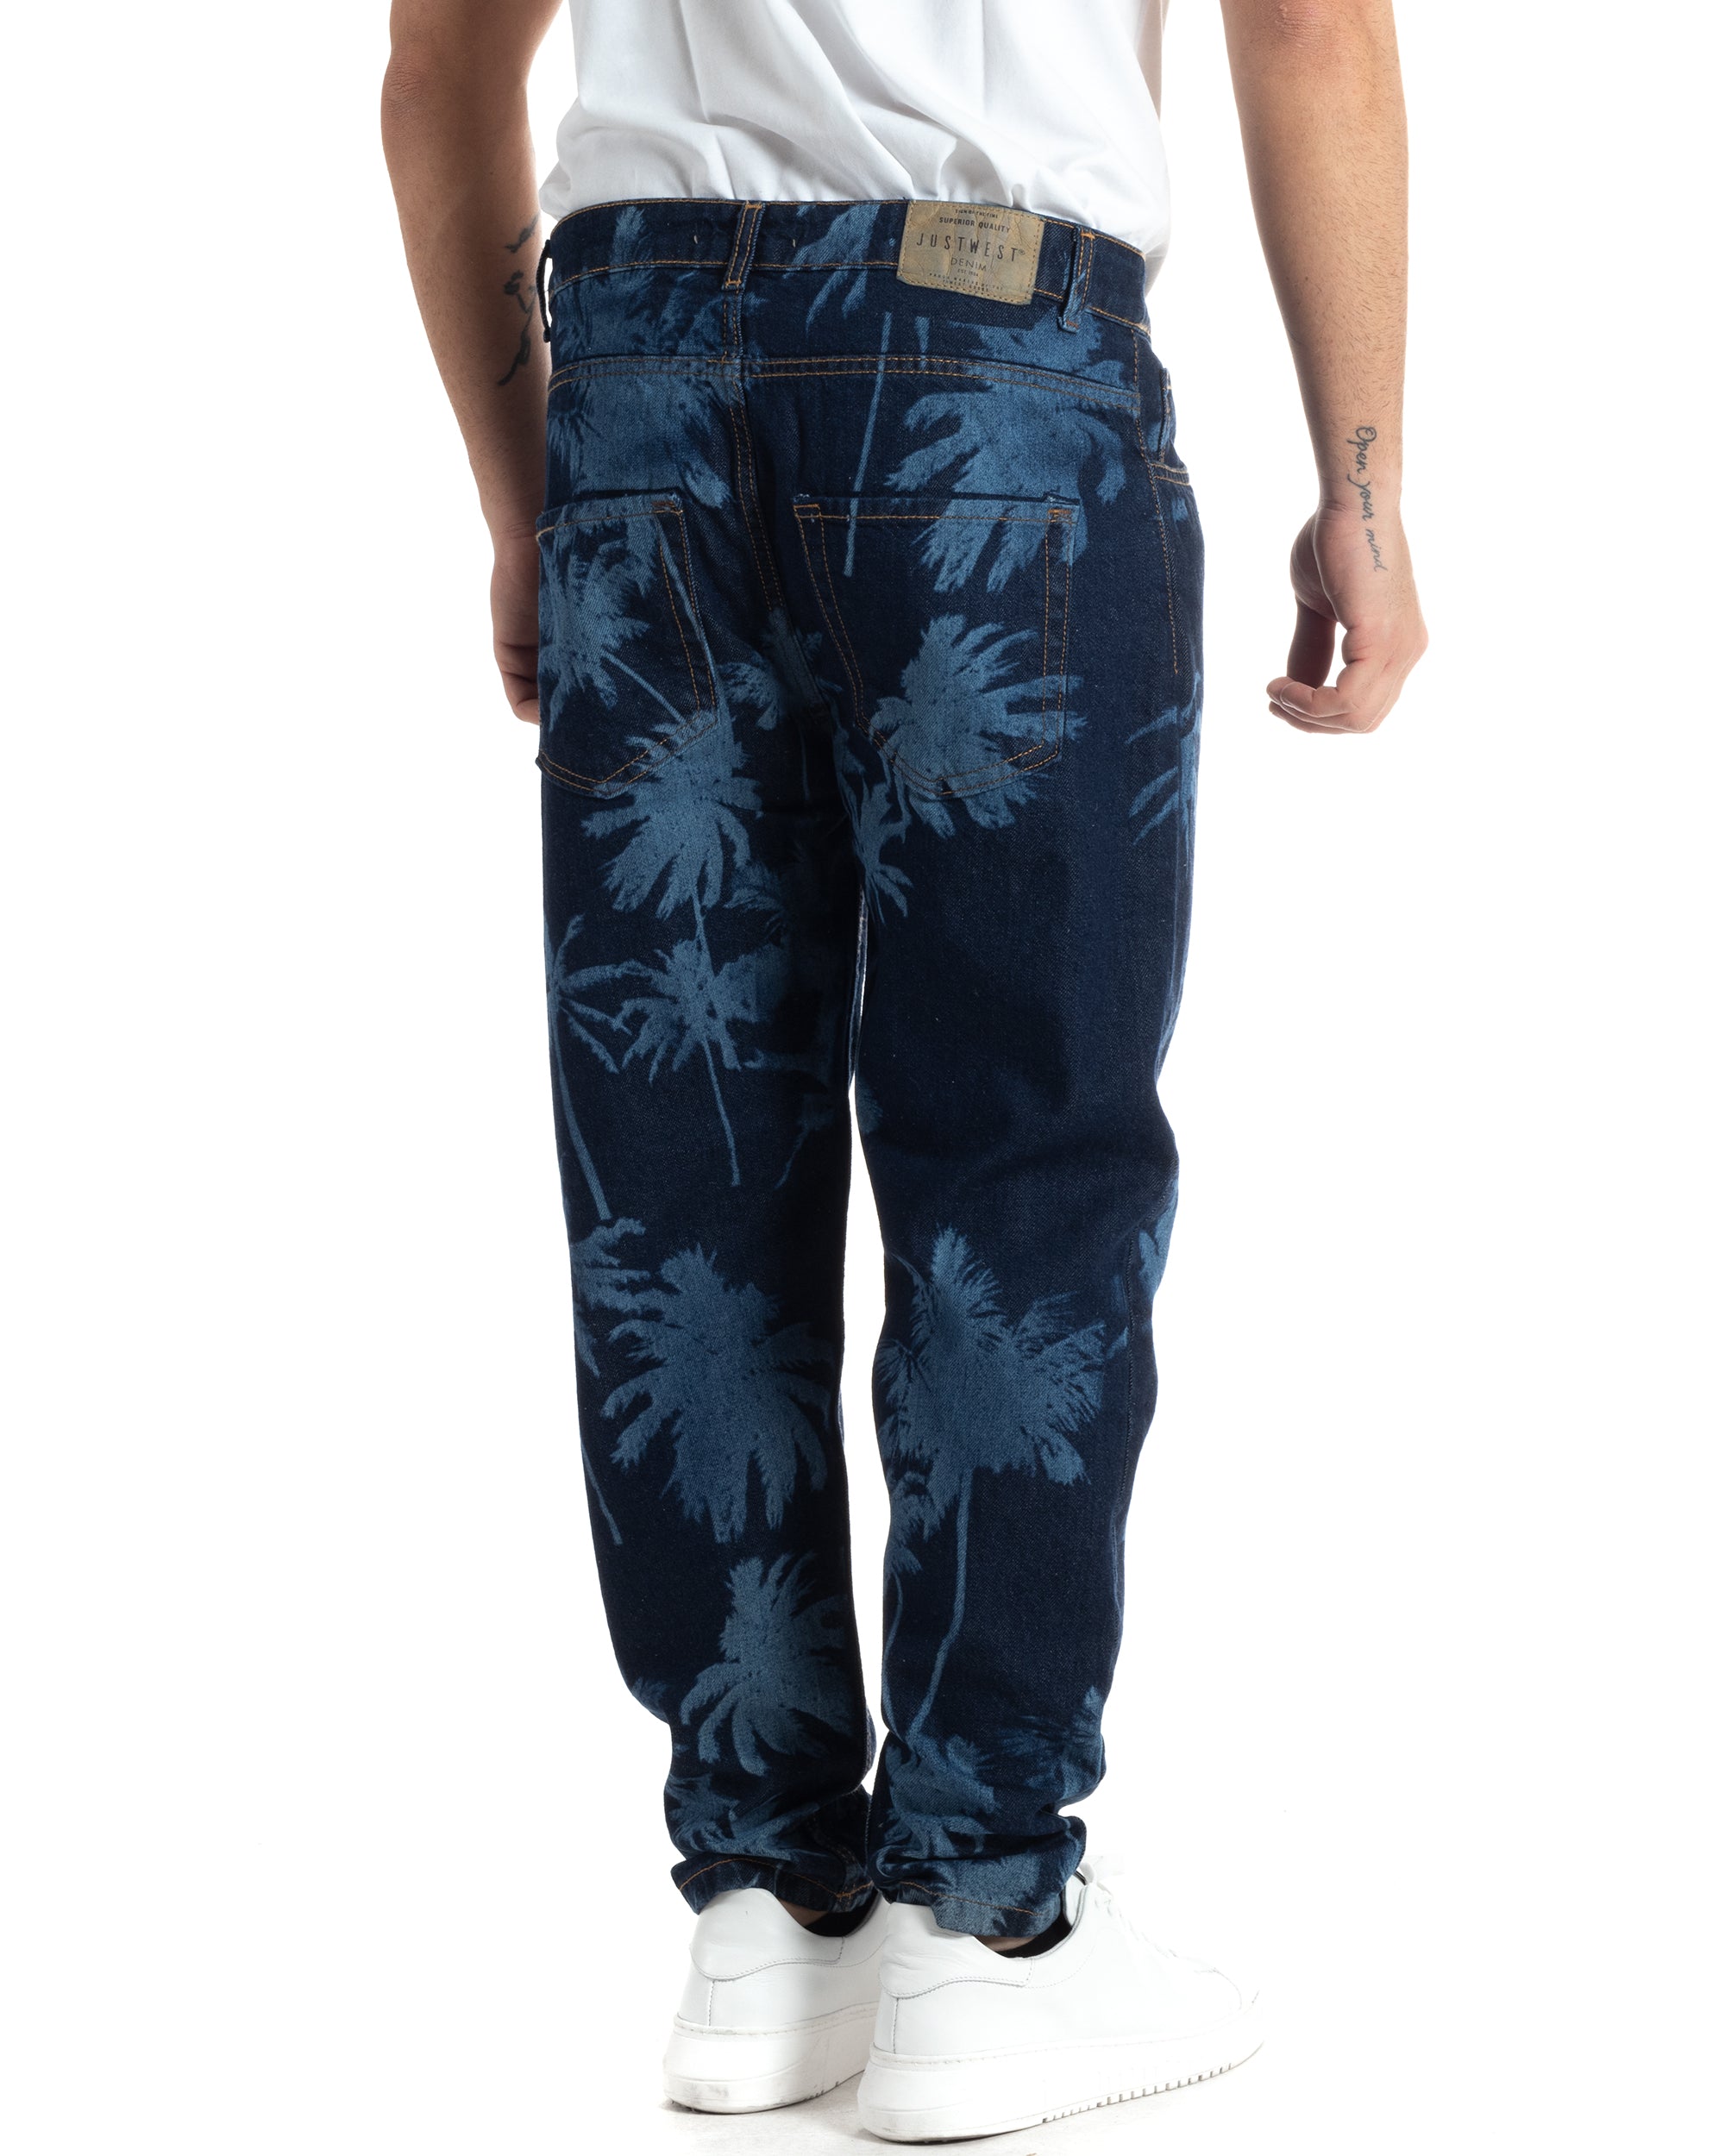 Men's Jeans Trousers Loose Fit Dark Denim With Sandblasted Rips GIOSAL-P5445A